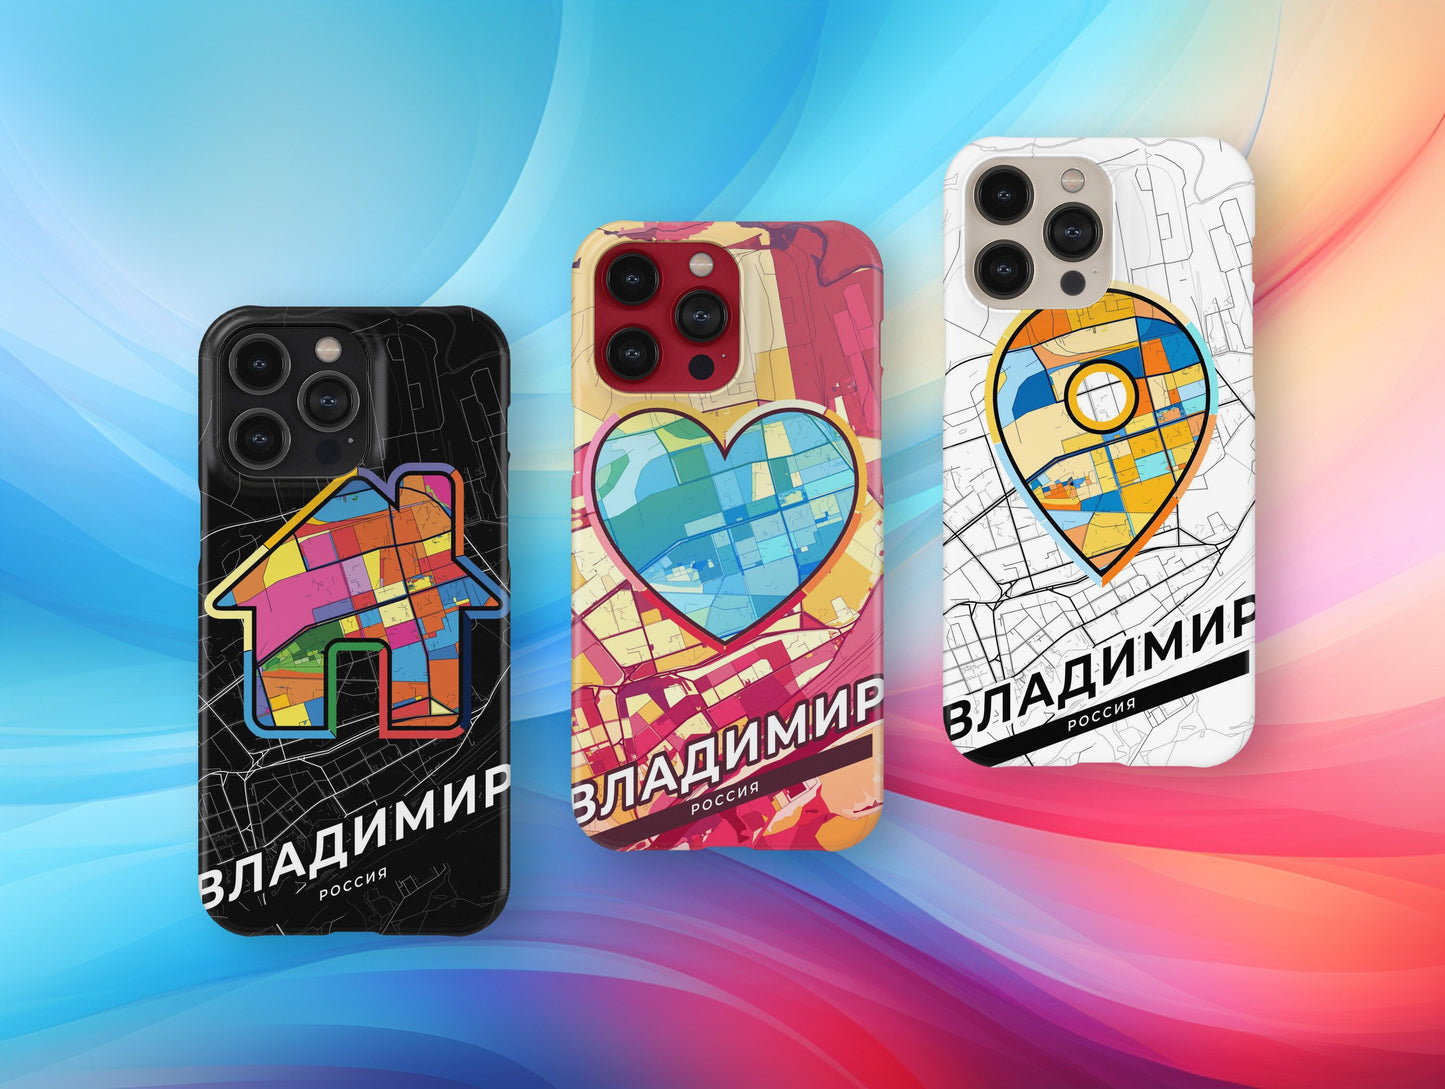 Vladimir Russia slim phone case with colorful icon